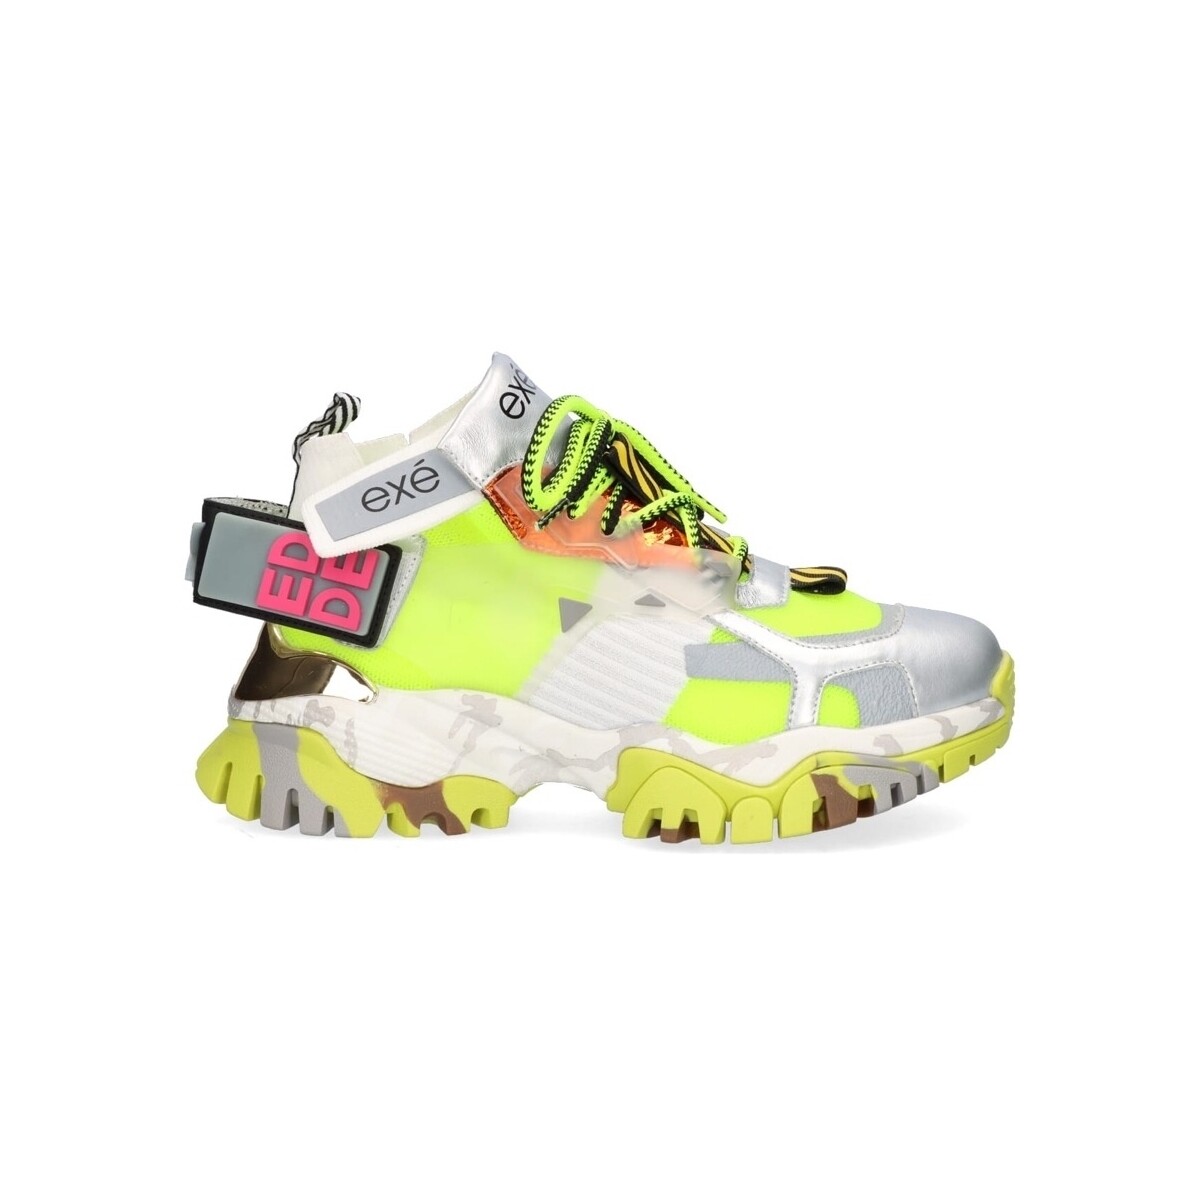 Sneakers Exé Shoes EXÉ Sneakers XY3925-1 - Silver/Grey/Lime